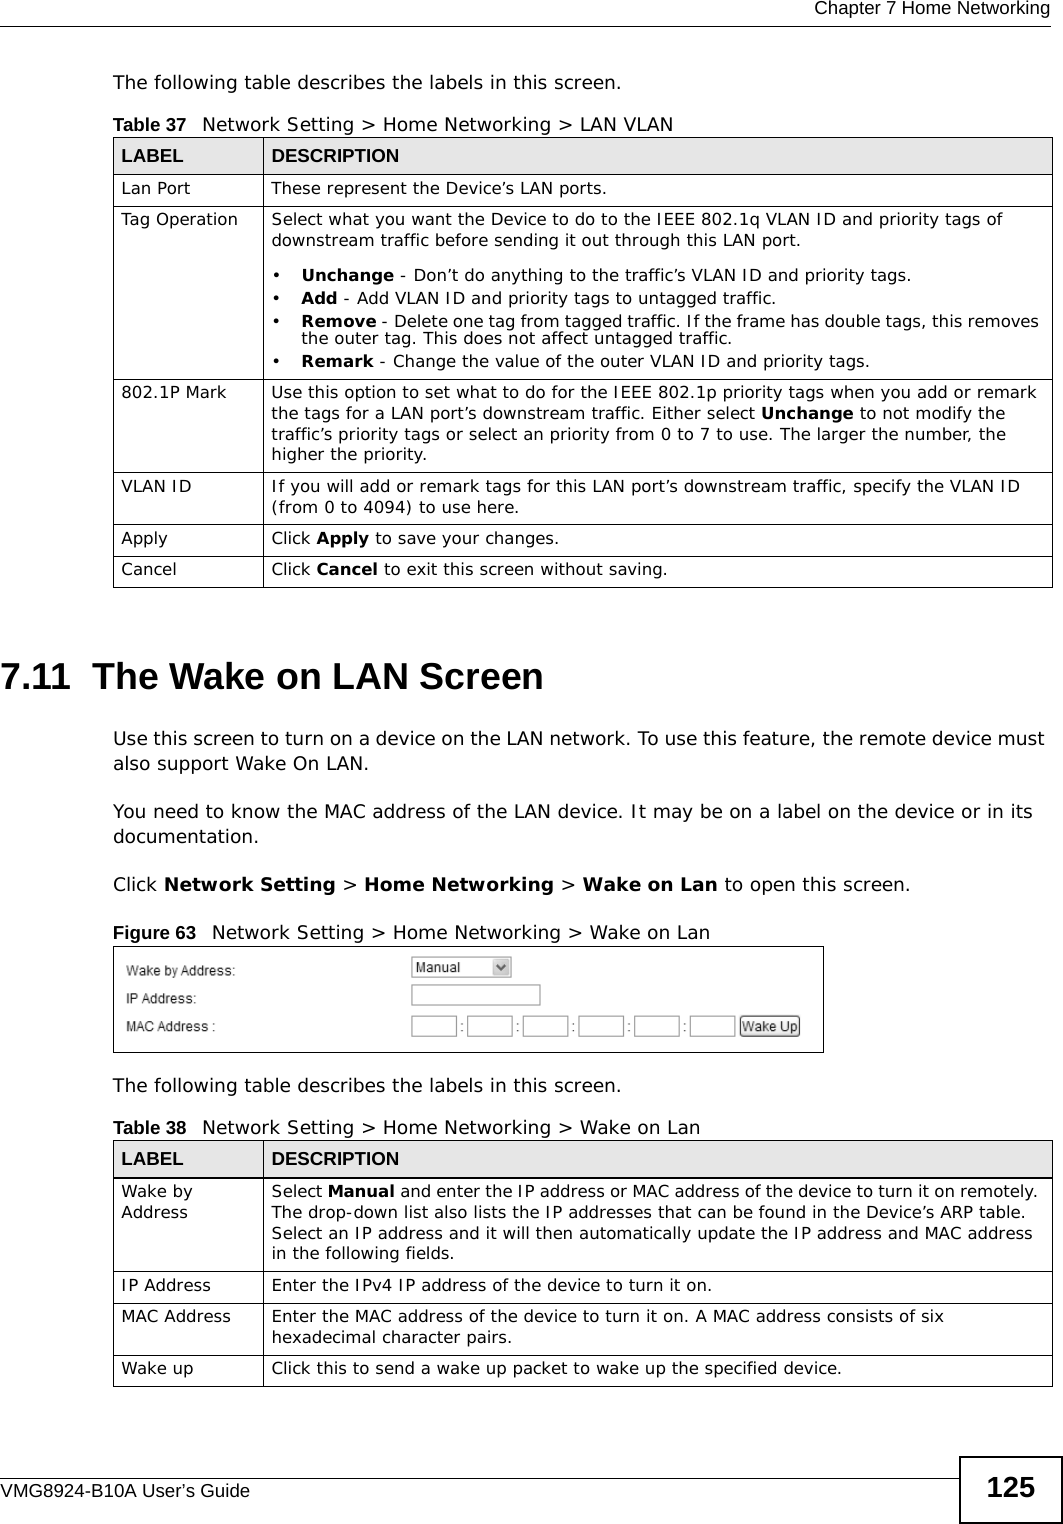  Chapter 7 Home NetworkingVMG8924-B10A User’s Guide 125The following table describes the labels in this screen.7.11  The Wake on LAN ScreenUse this screen to turn on a device on the LAN network. To use this feature, the remote device must also support Wake On LAN.You need to know the MAC address of the LAN device. It may be on a label on the device or in its documentation.Click Network Setting &gt; Home Networking &gt; Wake on Lan to open this screen.  Figure 63   Network Setting &gt; Home Networking &gt; Wake on LanThe following table describes the labels in this screen.Table 37   Network Setting &gt; Home Networking &gt; LAN VLANLABEL DESCRIPTIONLan Port These represent the Device’s LAN ports.Tag Operation Select what you want the Device to do to the IEEE 802.1q VLAN ID and priority tags of downstream traffic before sending it out through this LAN port.•Unchange - Don’t do anything to the traffic’s VLAN ID and priority tags.•Add - Add VLAN ID and priority tags to untagged traffic.•Remove - Delete one tag from tagged traffic. If the frame has double tags, this removes the outer tag. This does not affect untagged traffic.•Remark - Change the value of the outer VLAN ID and priority tags.802.1P Mark Use this option to set what to do for the IEEE 802.1p priority tags when you add or remark the tags for a LAN port’s downstream traffic. Either select Unchange to not modify the traffic’s priority tags or select an priority from 0 to 7 to use. The larger the number, the higher the priority.VLAN ID If you will add or remark tags for this LAN port’s downstream traffic, specify the VLAN ID (from 0 to 4094) to use here.Apply Click Apply to save your changes.Cancel Click Cancel to exit this screen without saving.Table 38   Network Setting &gt; Home Networking &gt; Wake on LanLABEL DESCRIPTIONWake by Address Select Manual and enter the IP address or MAC address of the device to turn it on remotely. The drop-down list also lists the IP addresses that can be found in the Device’s ARP table. Select an IP address and it will then automatically update the IP address and MAC address in the following fields.IP Address Enter the IPv4 IP address of the device to turn it on.MAC Address Enter the MAC address of the device to turn it on. A MAC address consists of six hexadecimal character pairs.Wake up Click this to send a wake up packet to wake up the specified device. 